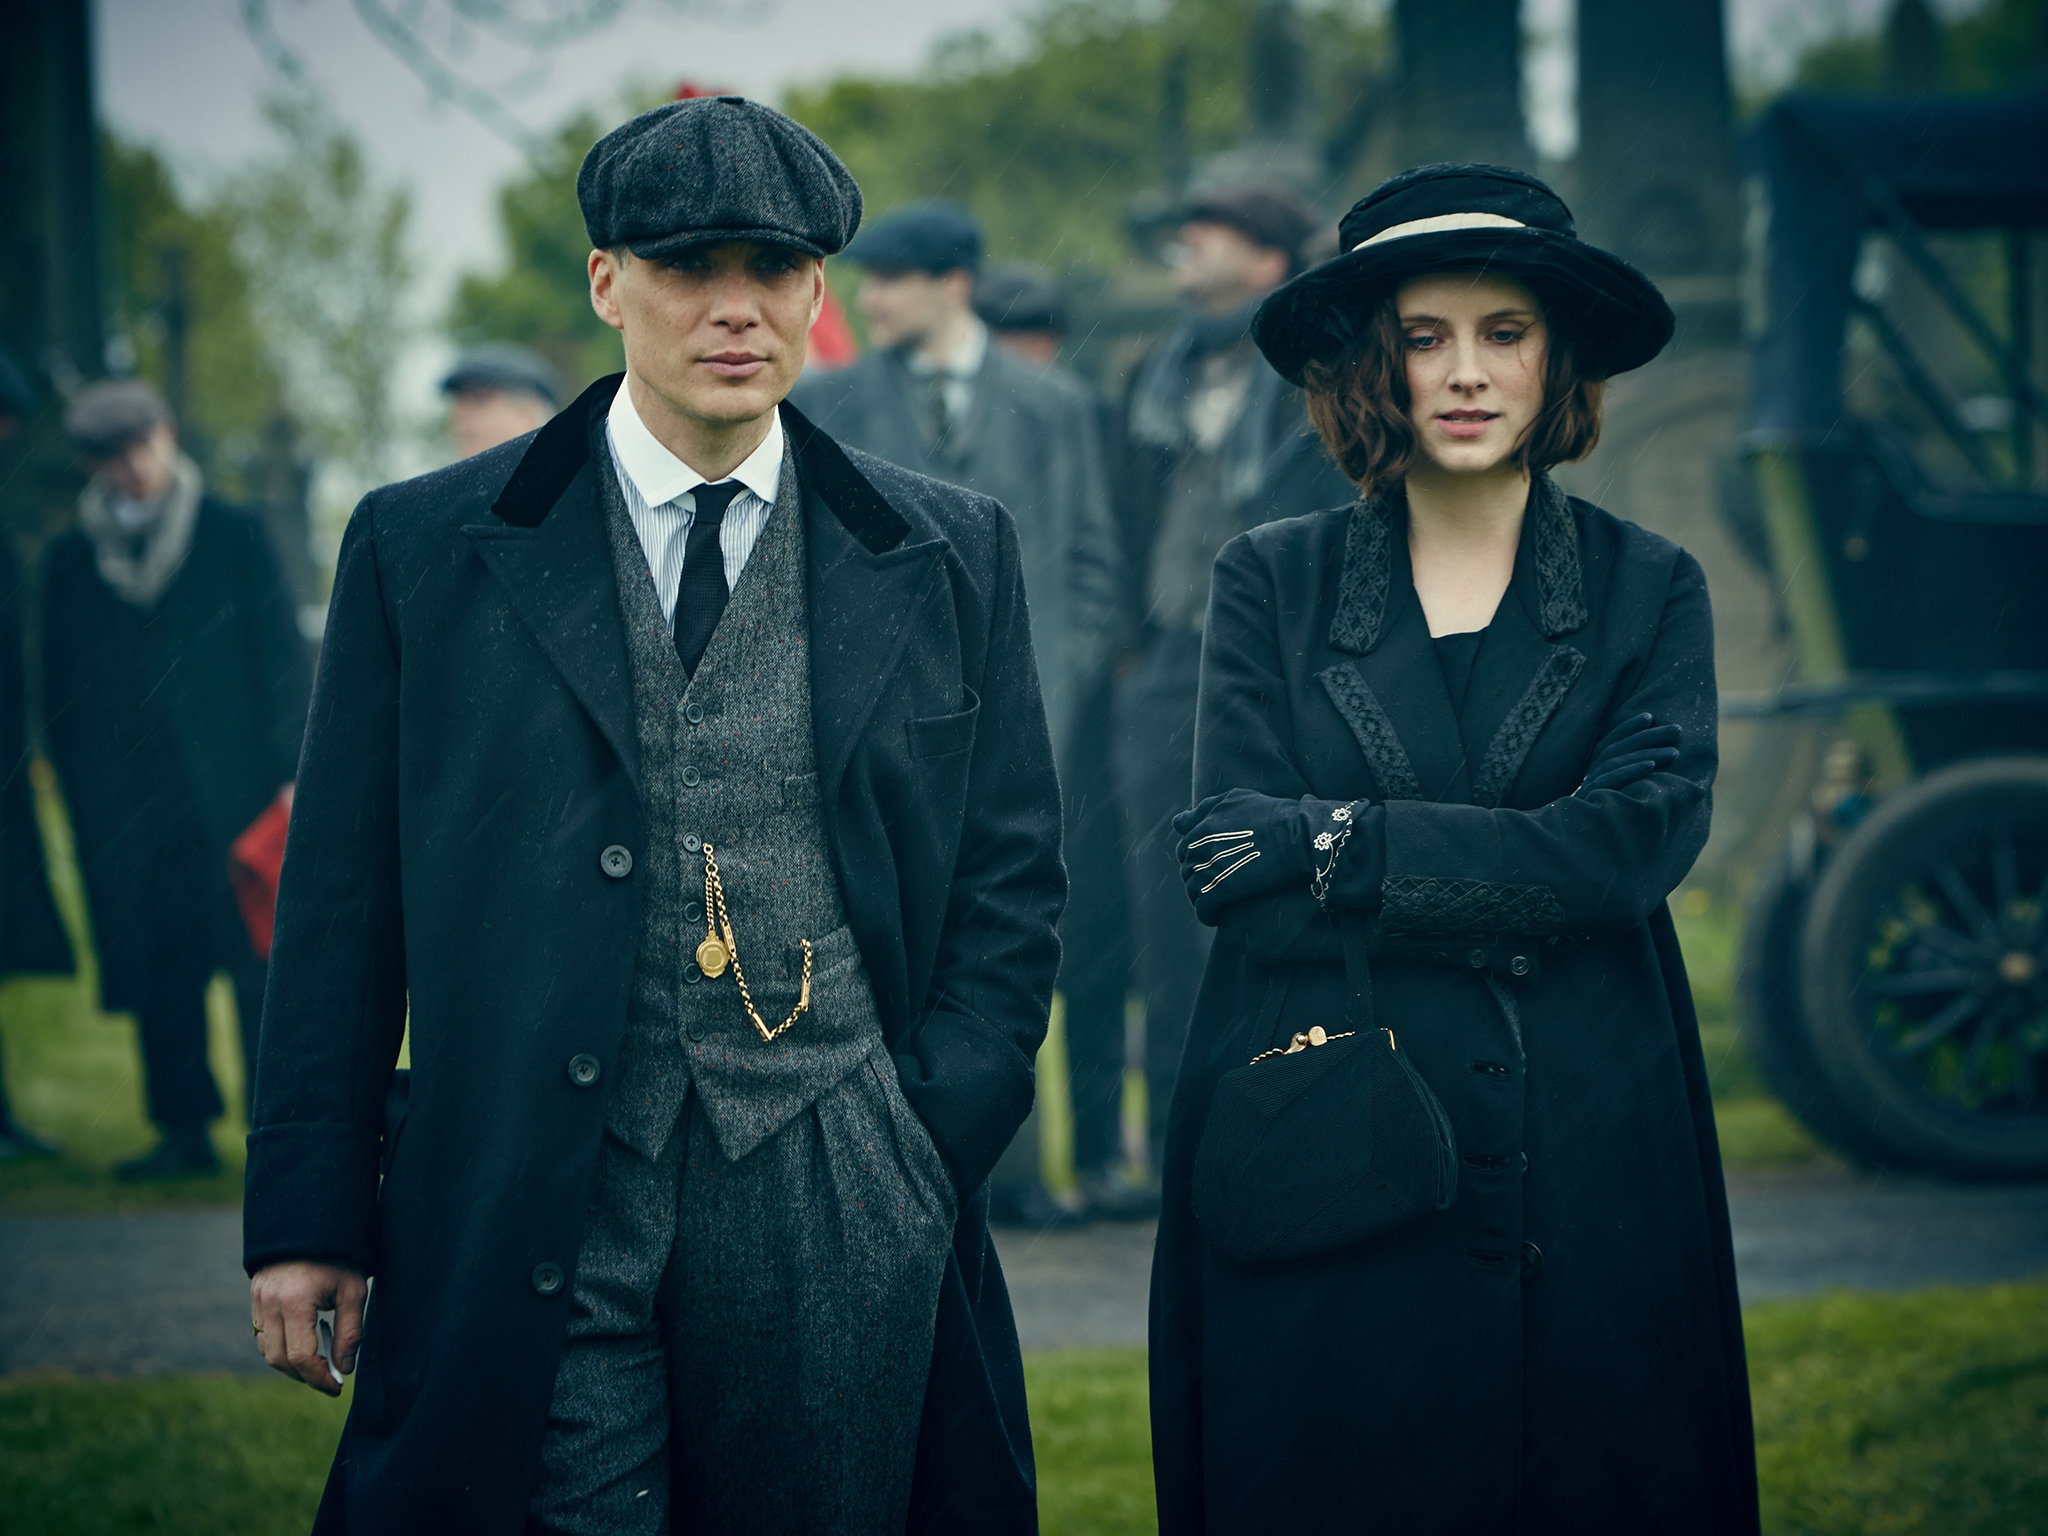 Shelby Family, Peaky Blinders wallpapers, TV show HQ, Peaky Blinders pictures, 2050x1540 HD Desktop